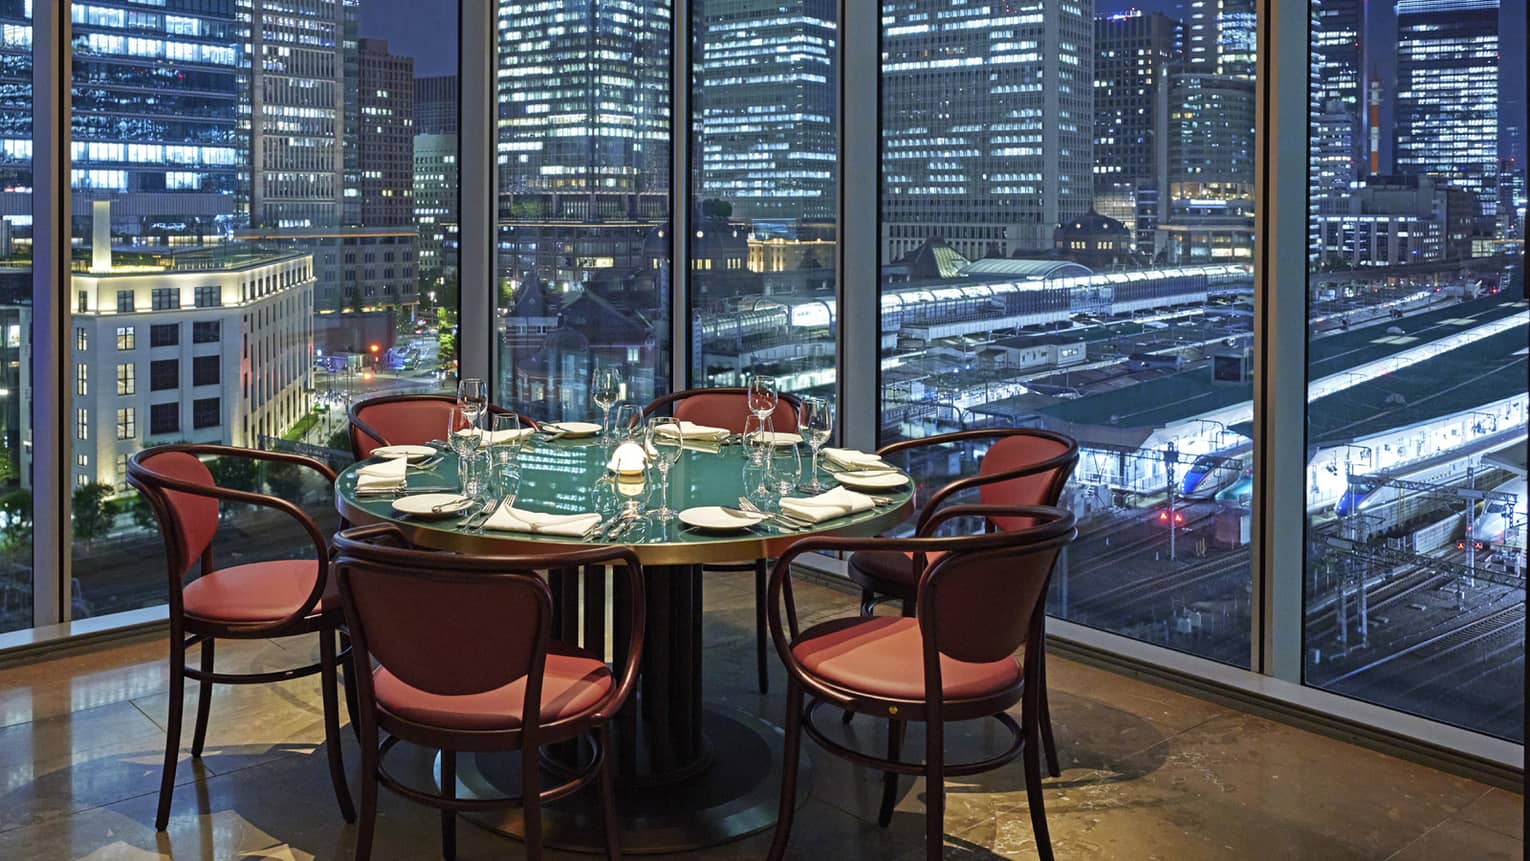 A round table and six chairs at Maison Marunouchi, floor-to-ceiling windows with views of downtown Tokyo at night